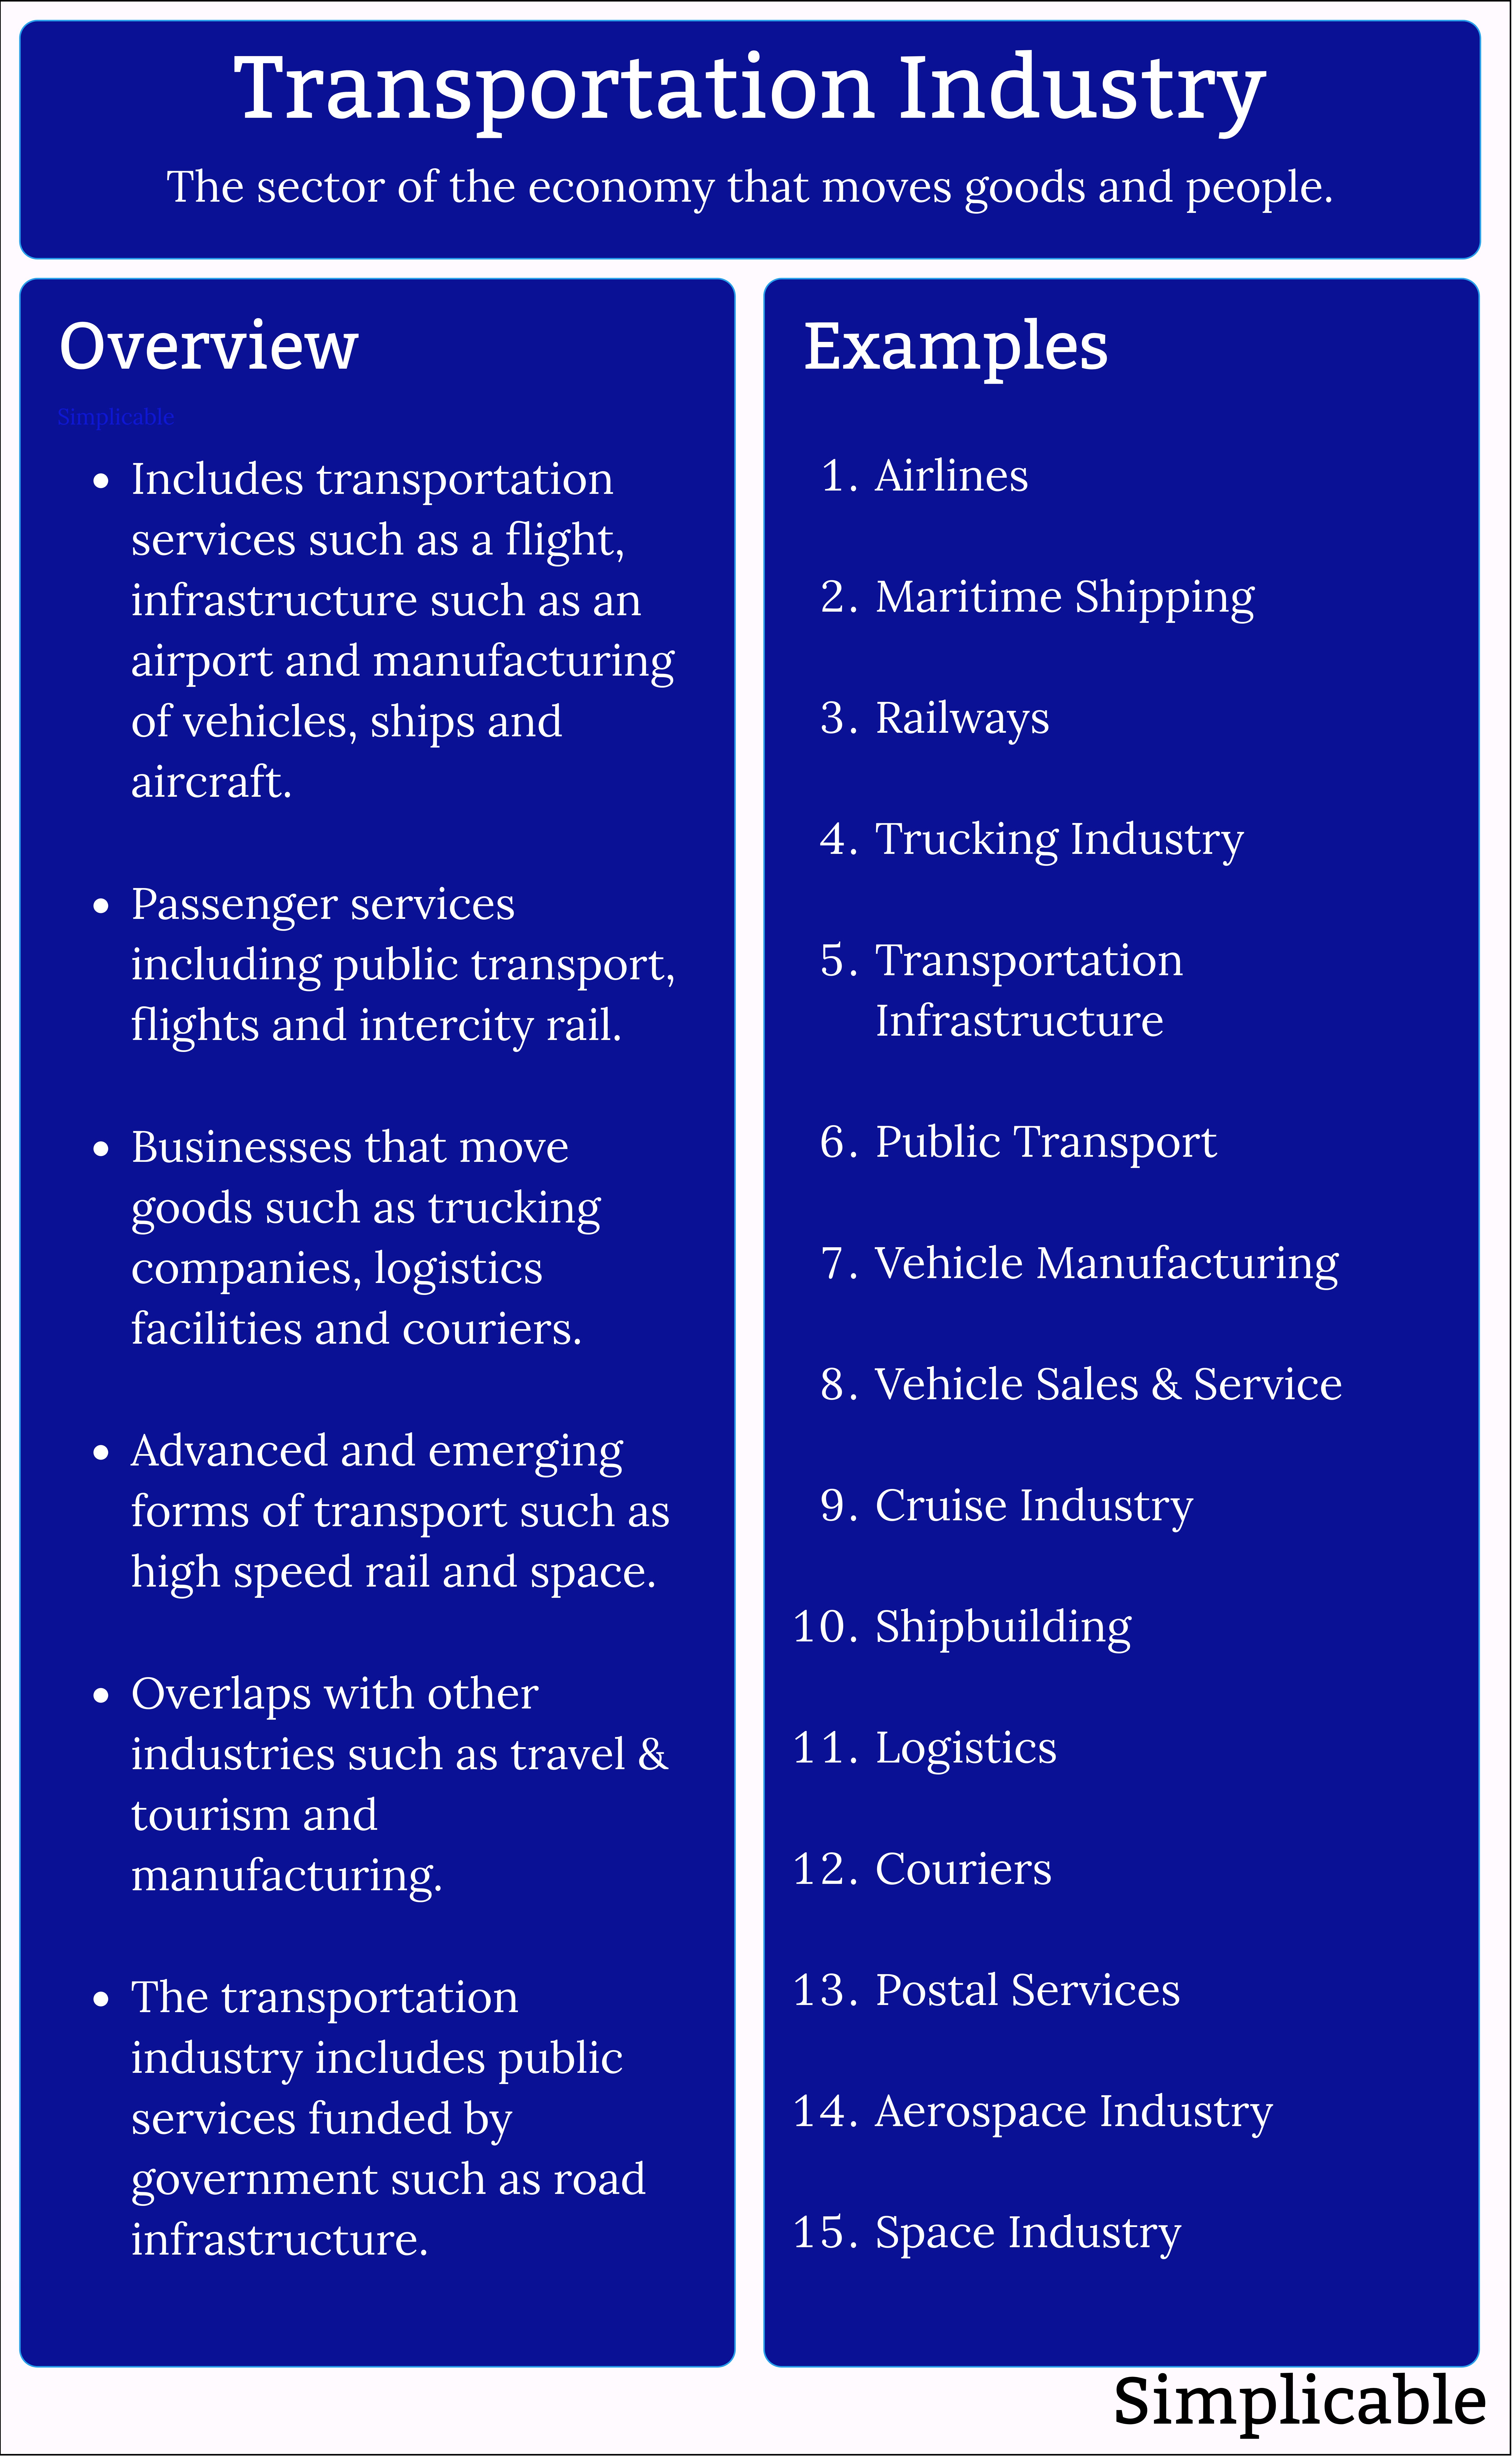 transportation industry overview and examples